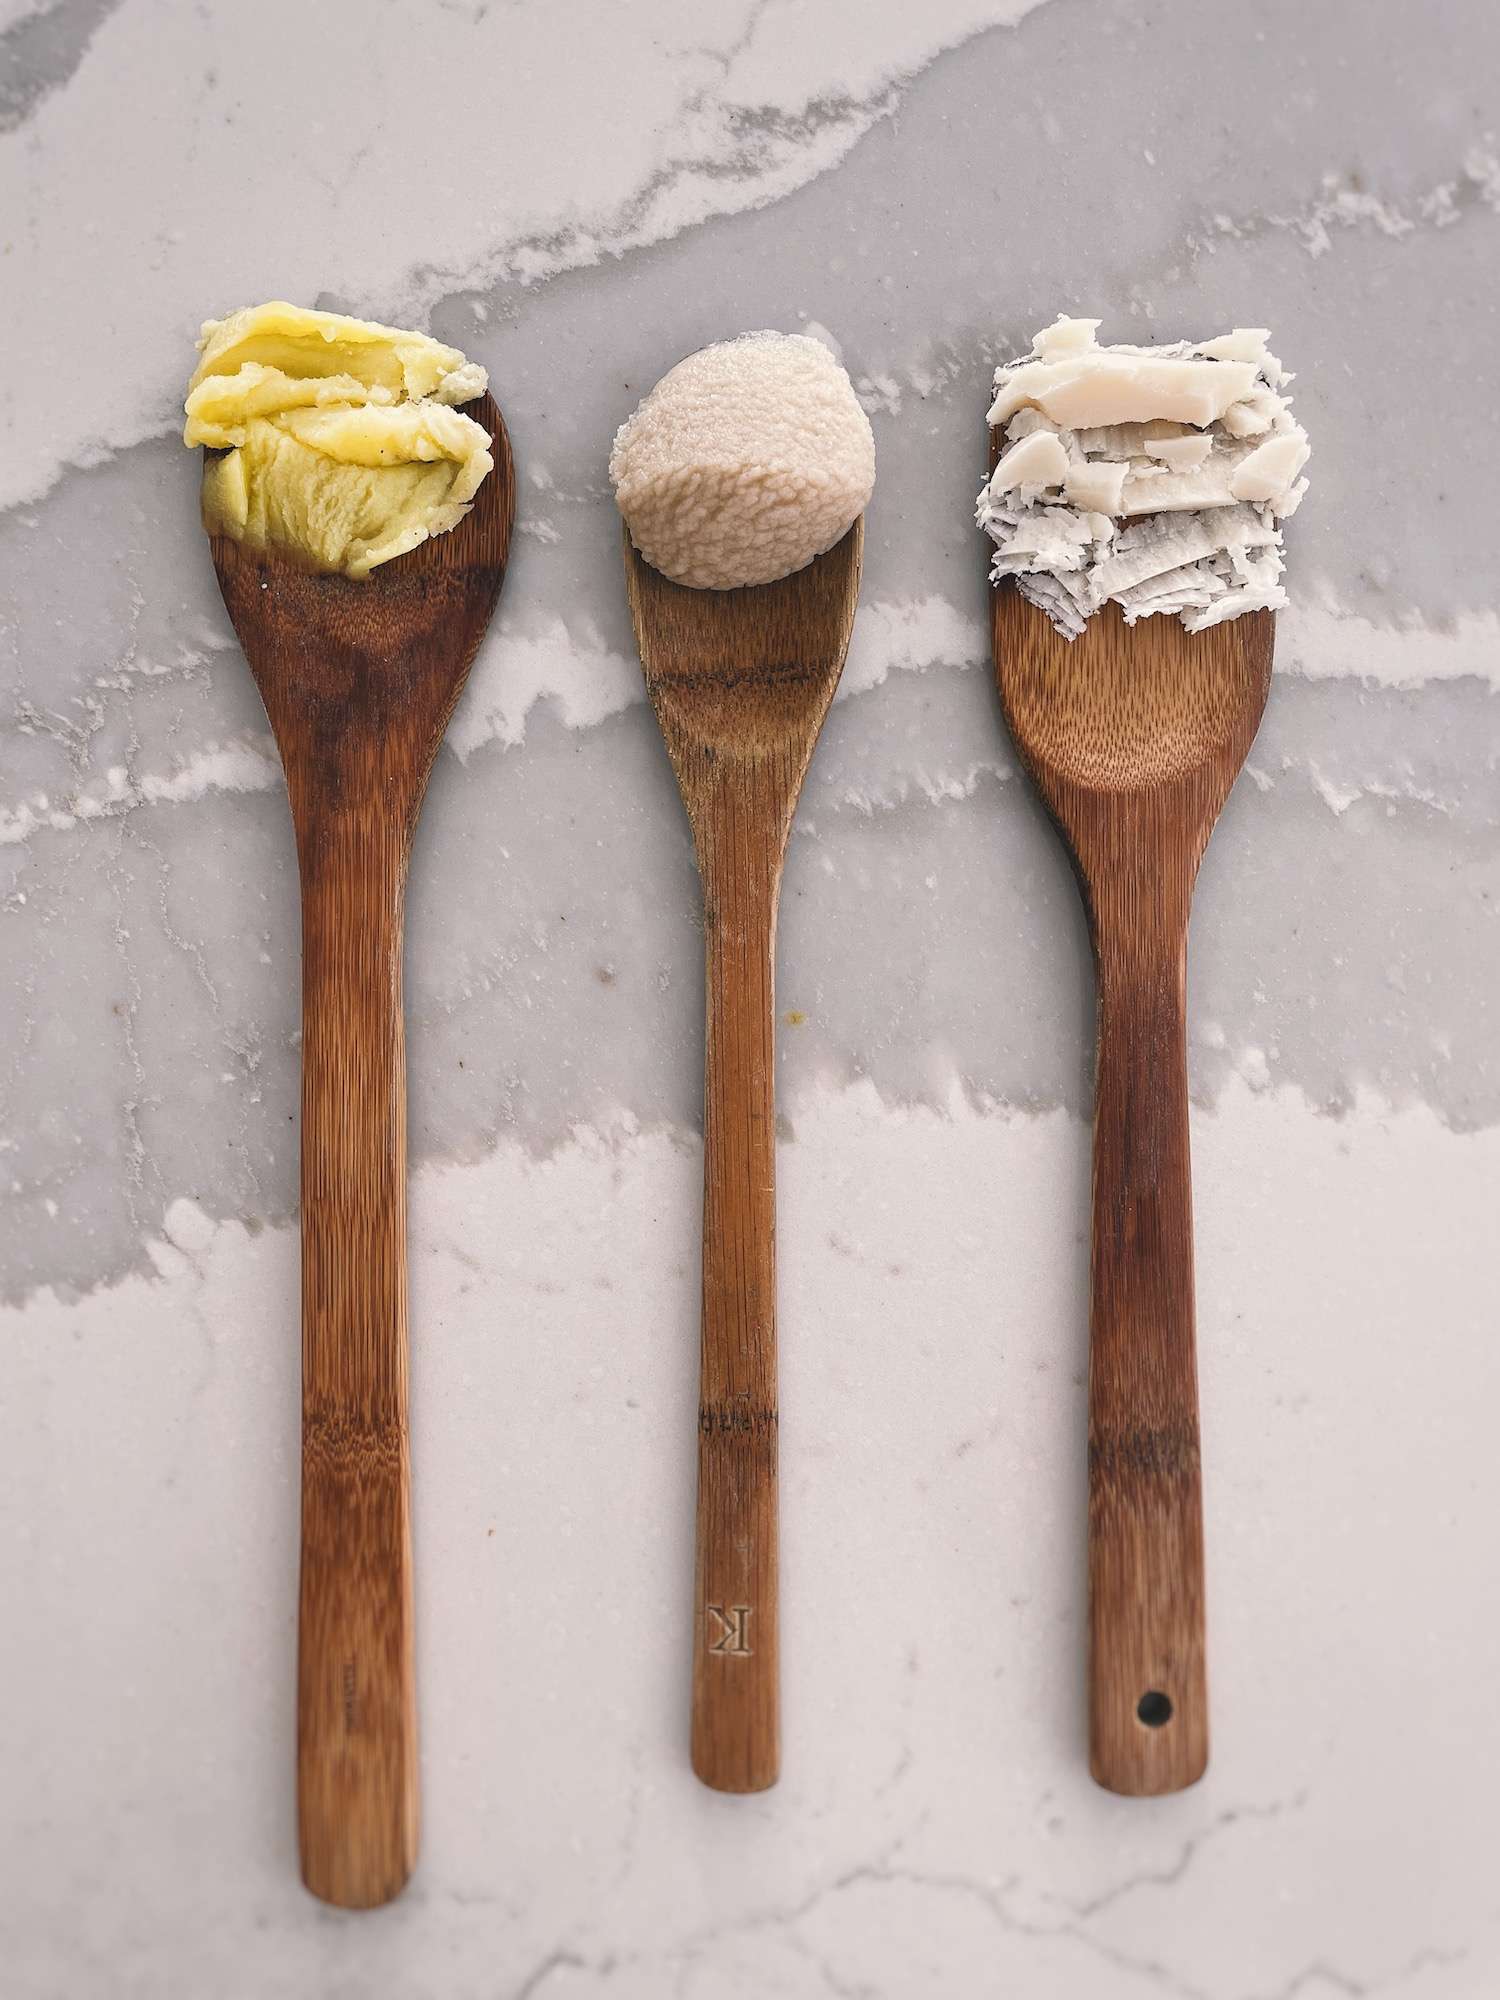 3 wooden spoons in a row, each holding a scoop of different rendered fats (schmaltz, bacon grease and tallow)